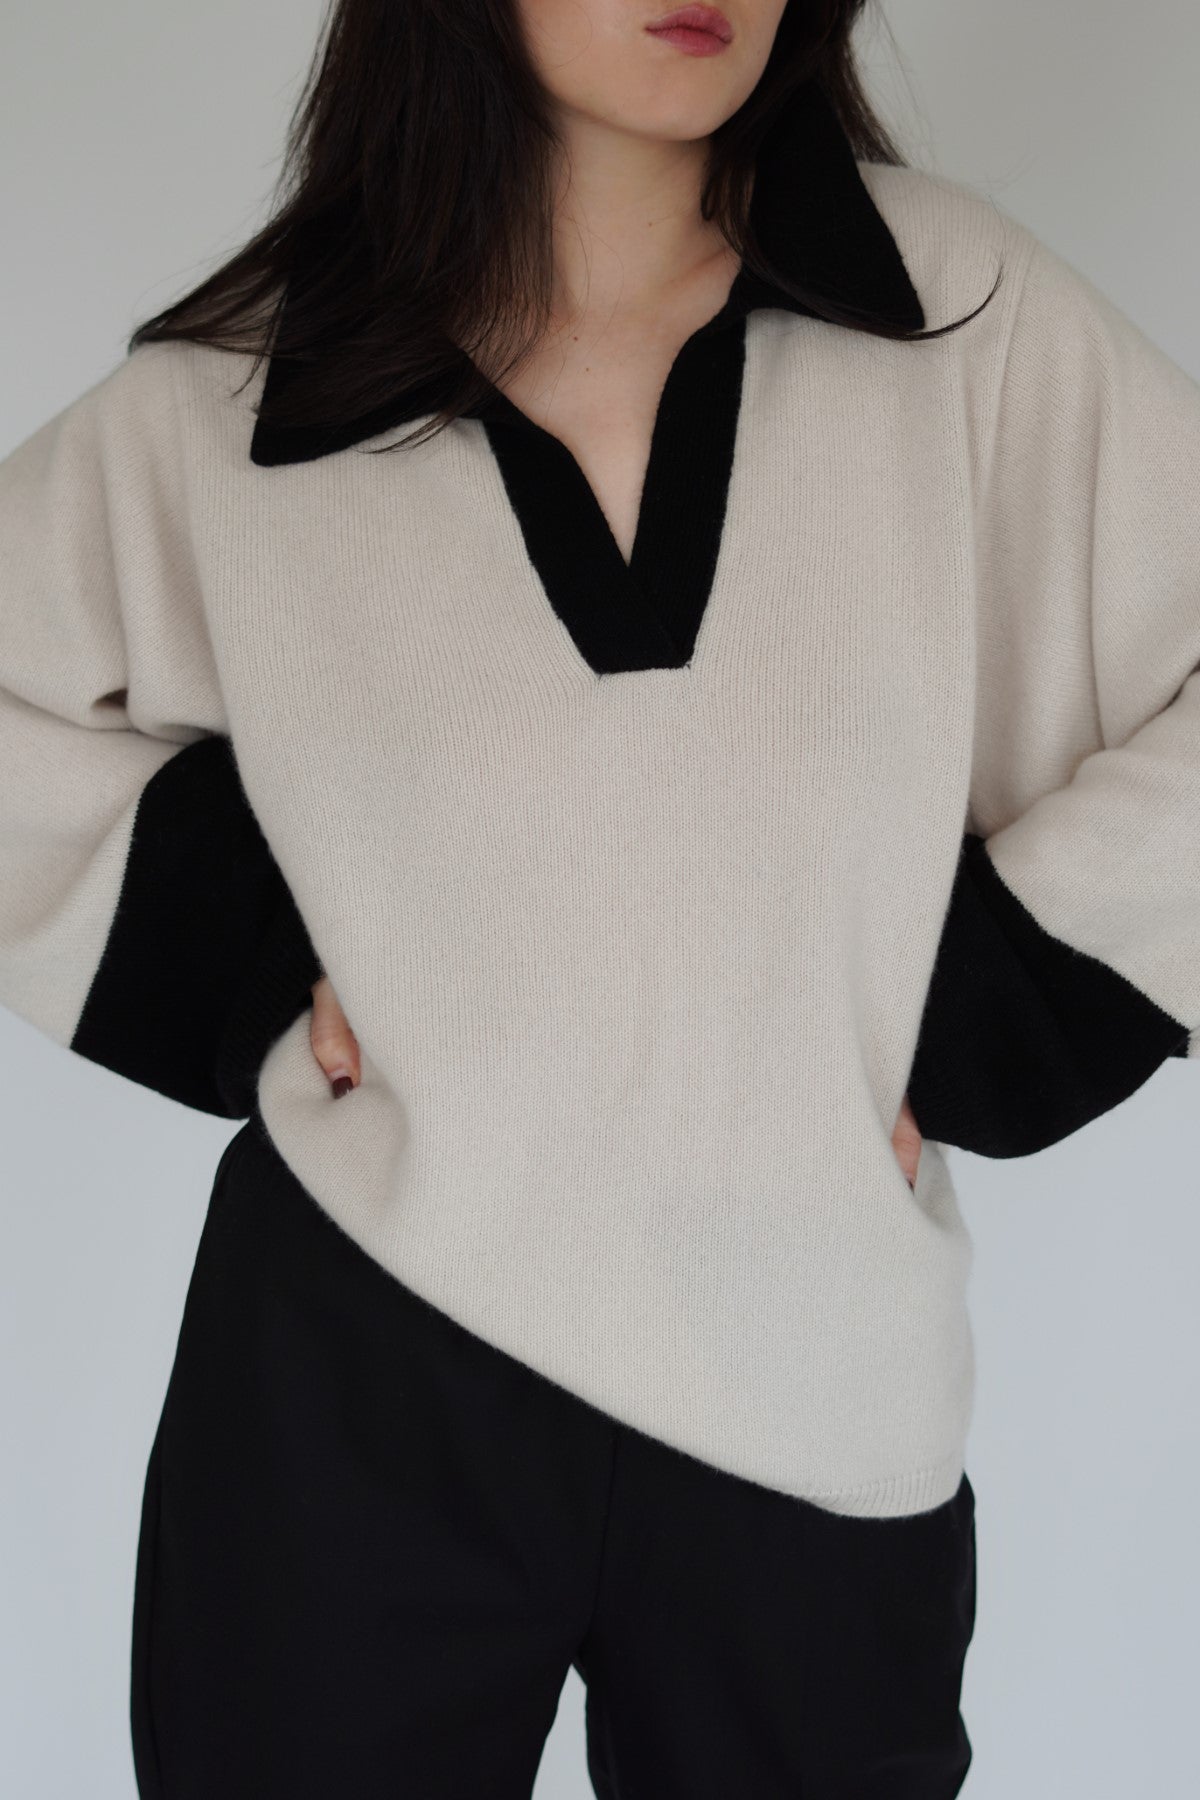 Cashmere sweater black sleeves and collar